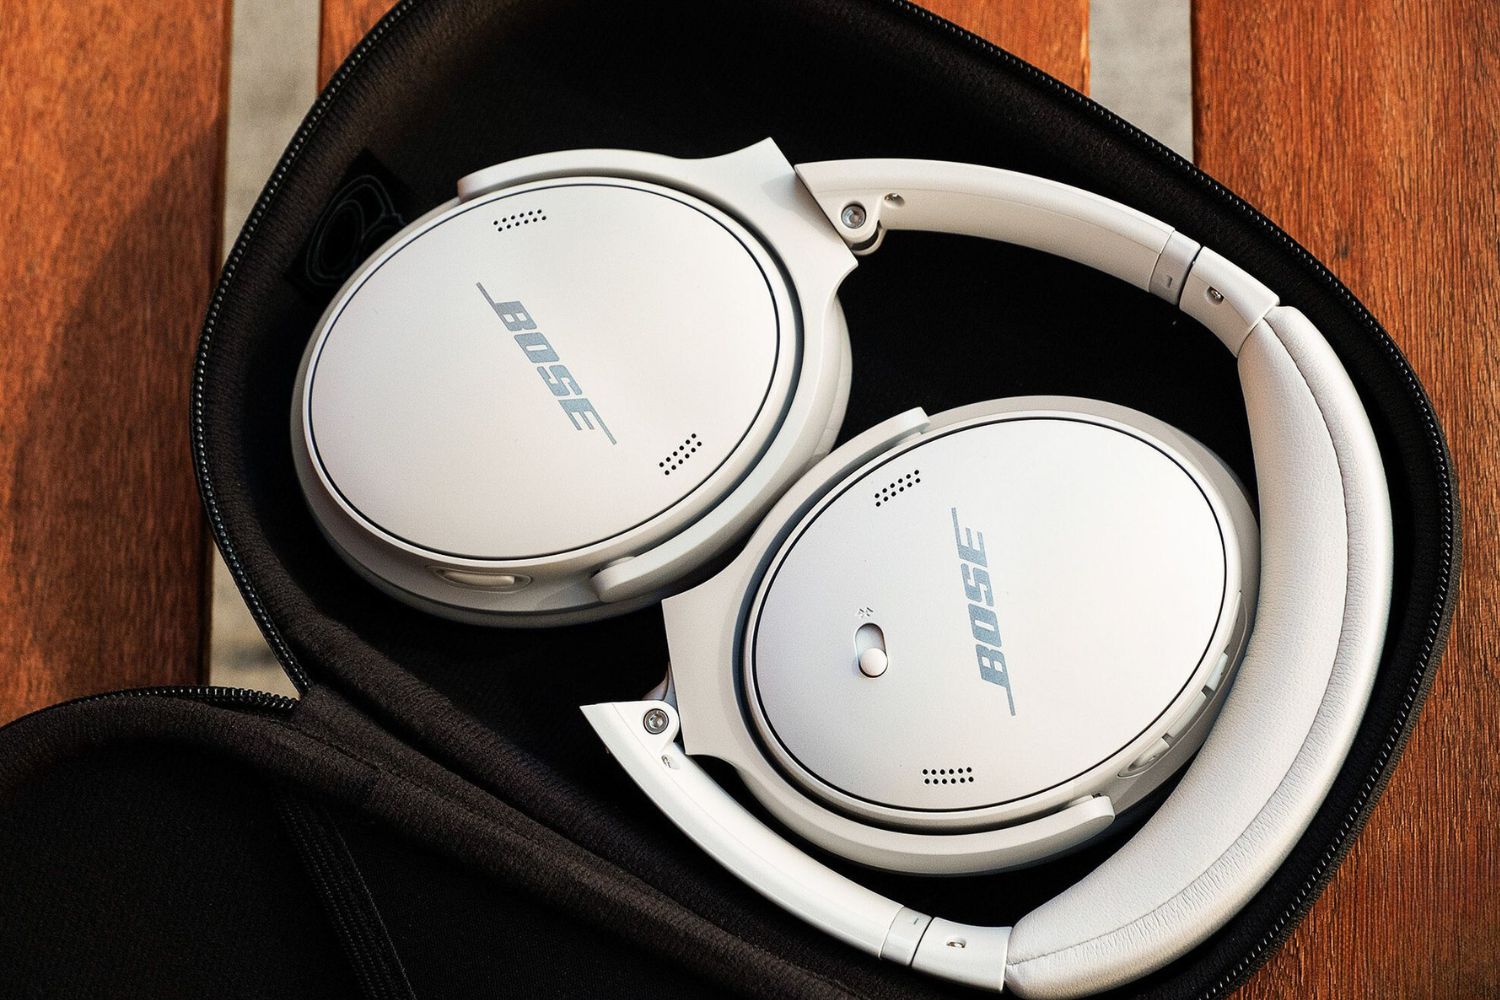 How To Fix One Side Of My Bose Noise Cancelling Headphones With No Sound